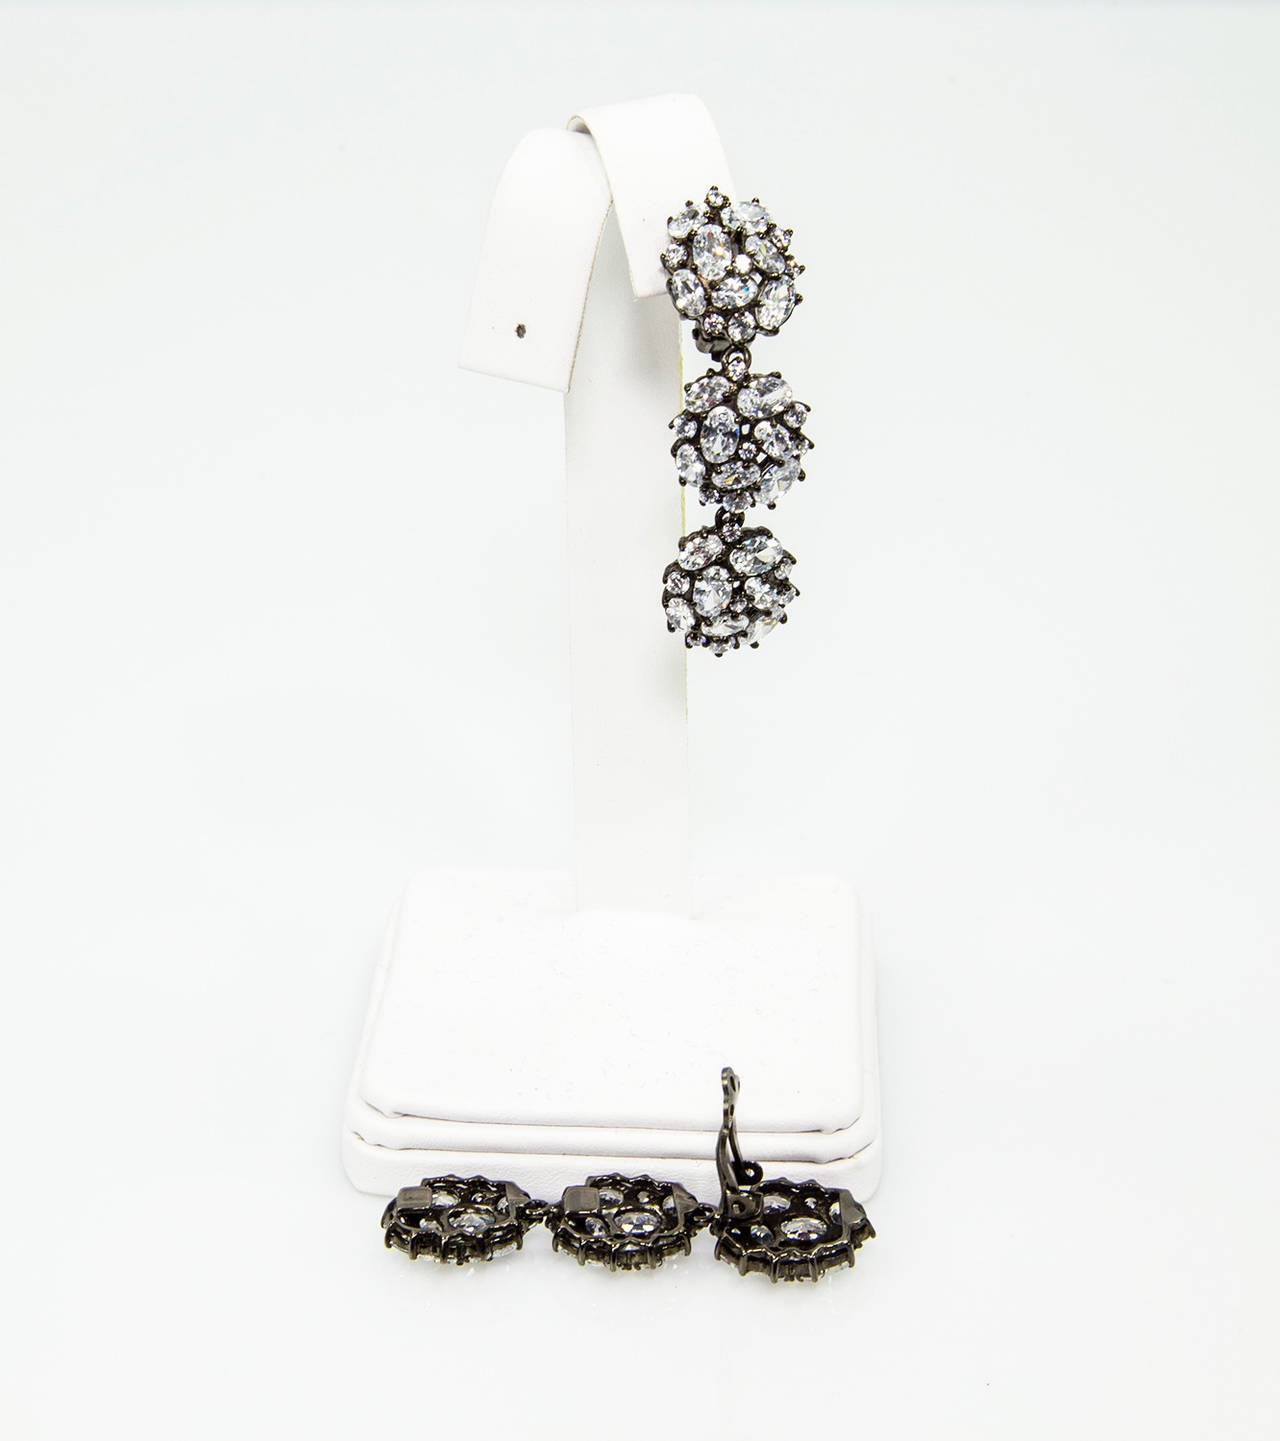 Beautiful Triple Round design Dangle Earrings, crafted in Black Rhodium plated sterling silver and encrusted with sparkling CZ; Earrings measures 2″ total length; Clip system; marked: 925. Chic, Classic and Timeless!